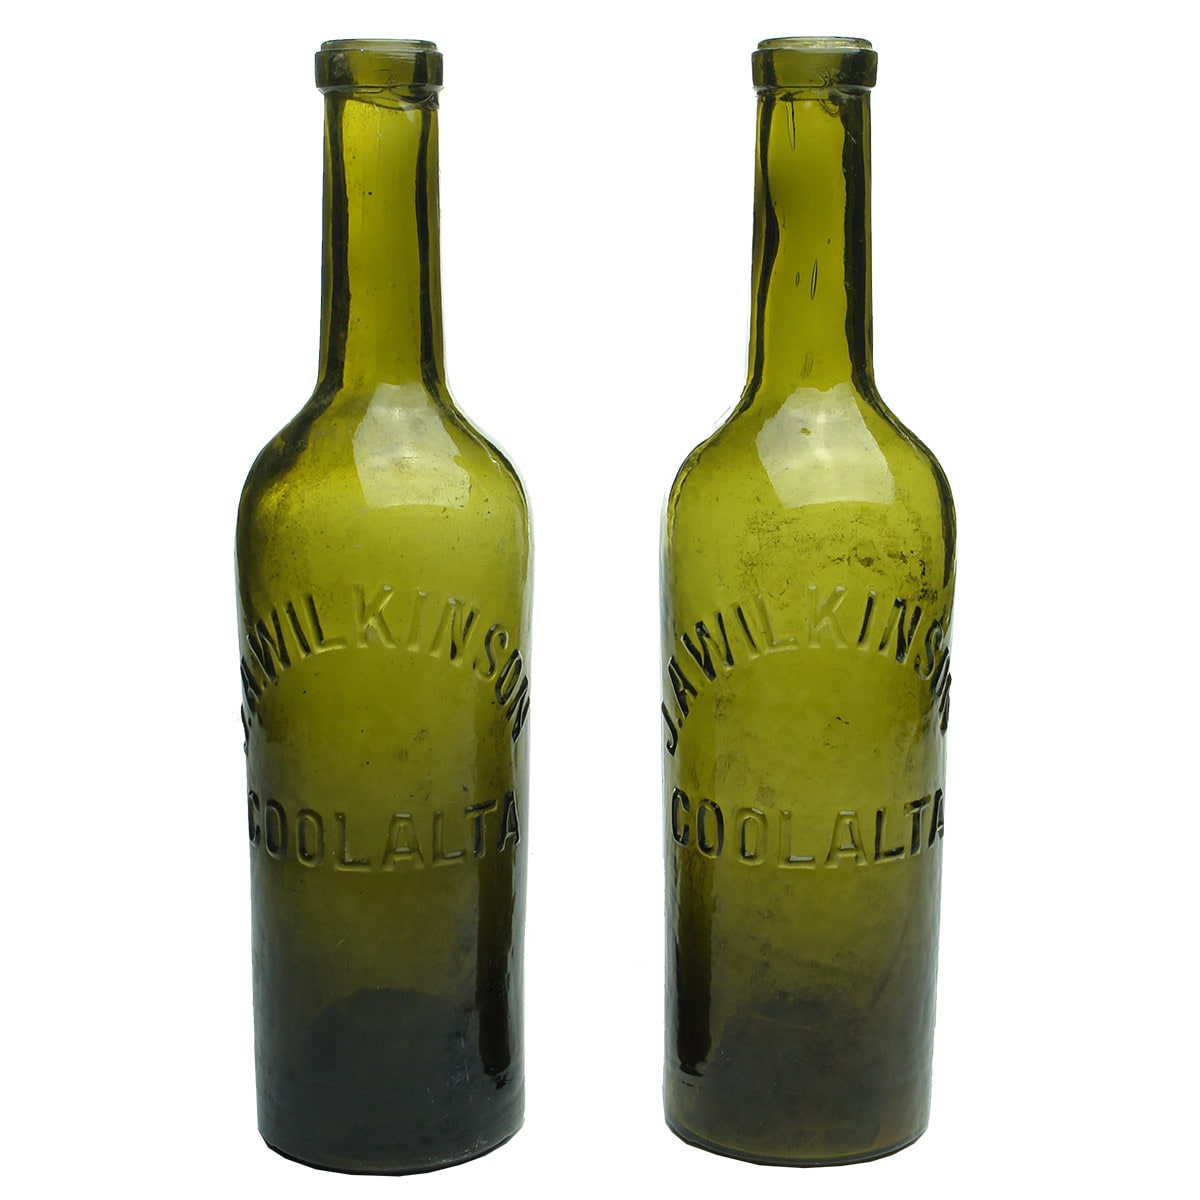 Pair of J. A. Wilkinson, Coolalta 13 oz Claret shaped wine bottles. (New South Wales)